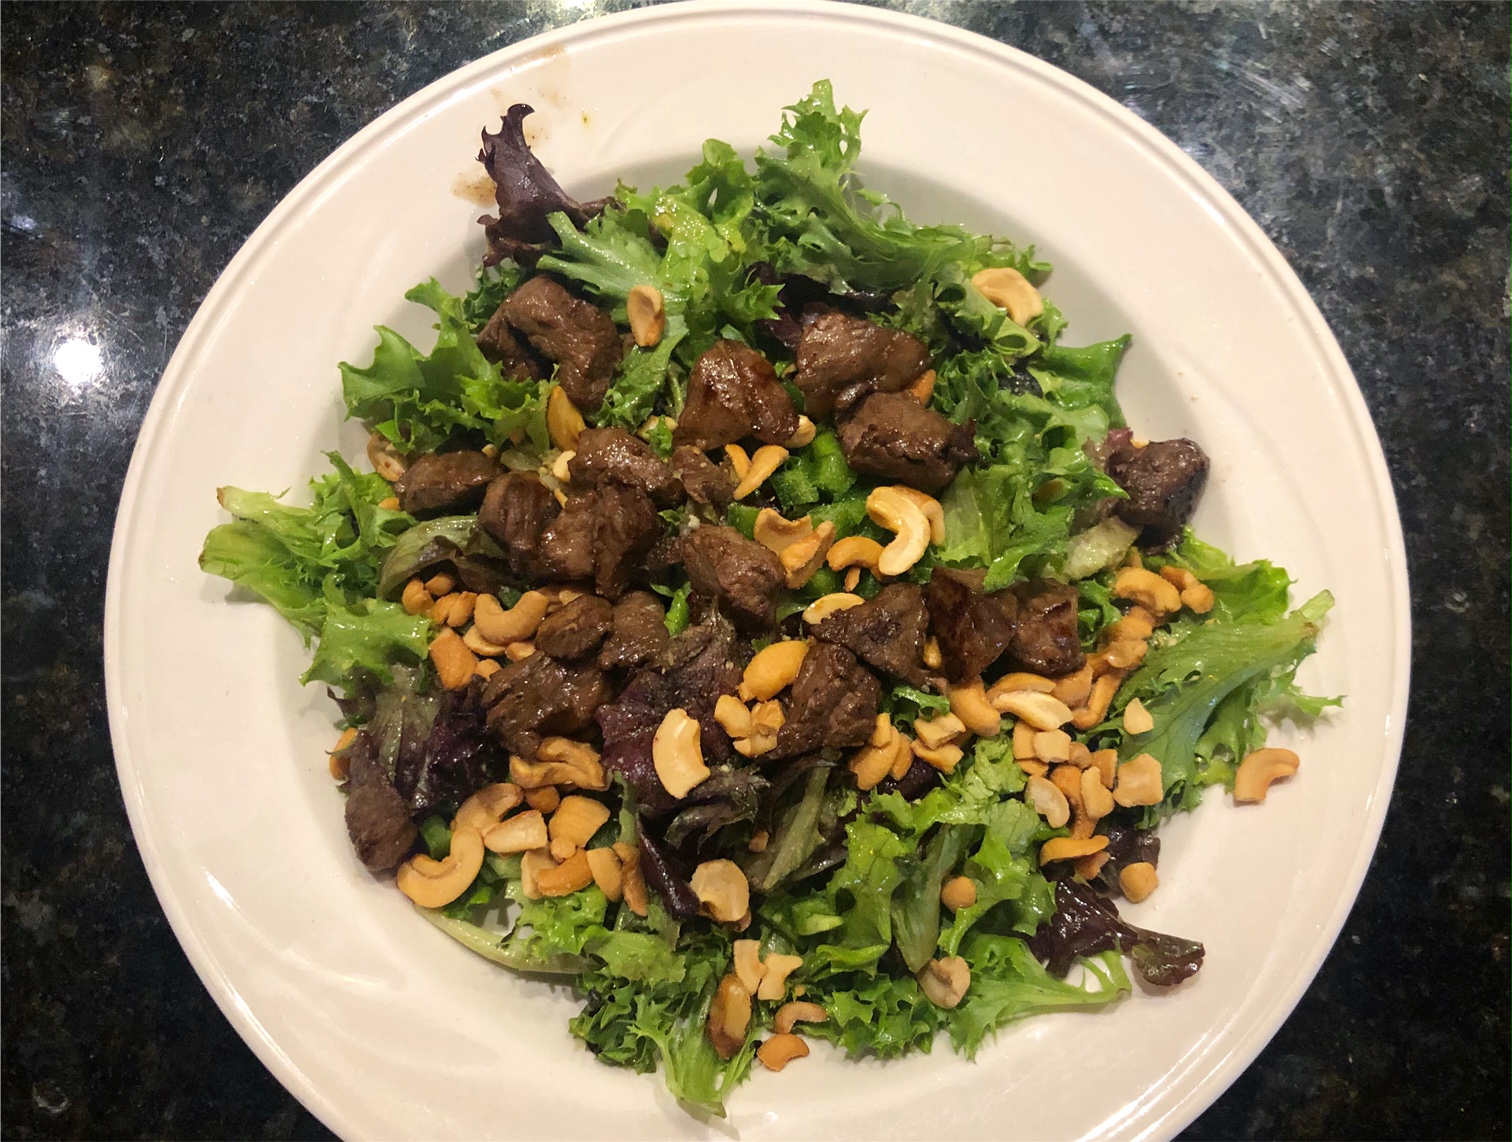 On a white plate, there is a steak salad with lots of steak chunks, cashews, and greens. Photo by Alyssa Buckley.